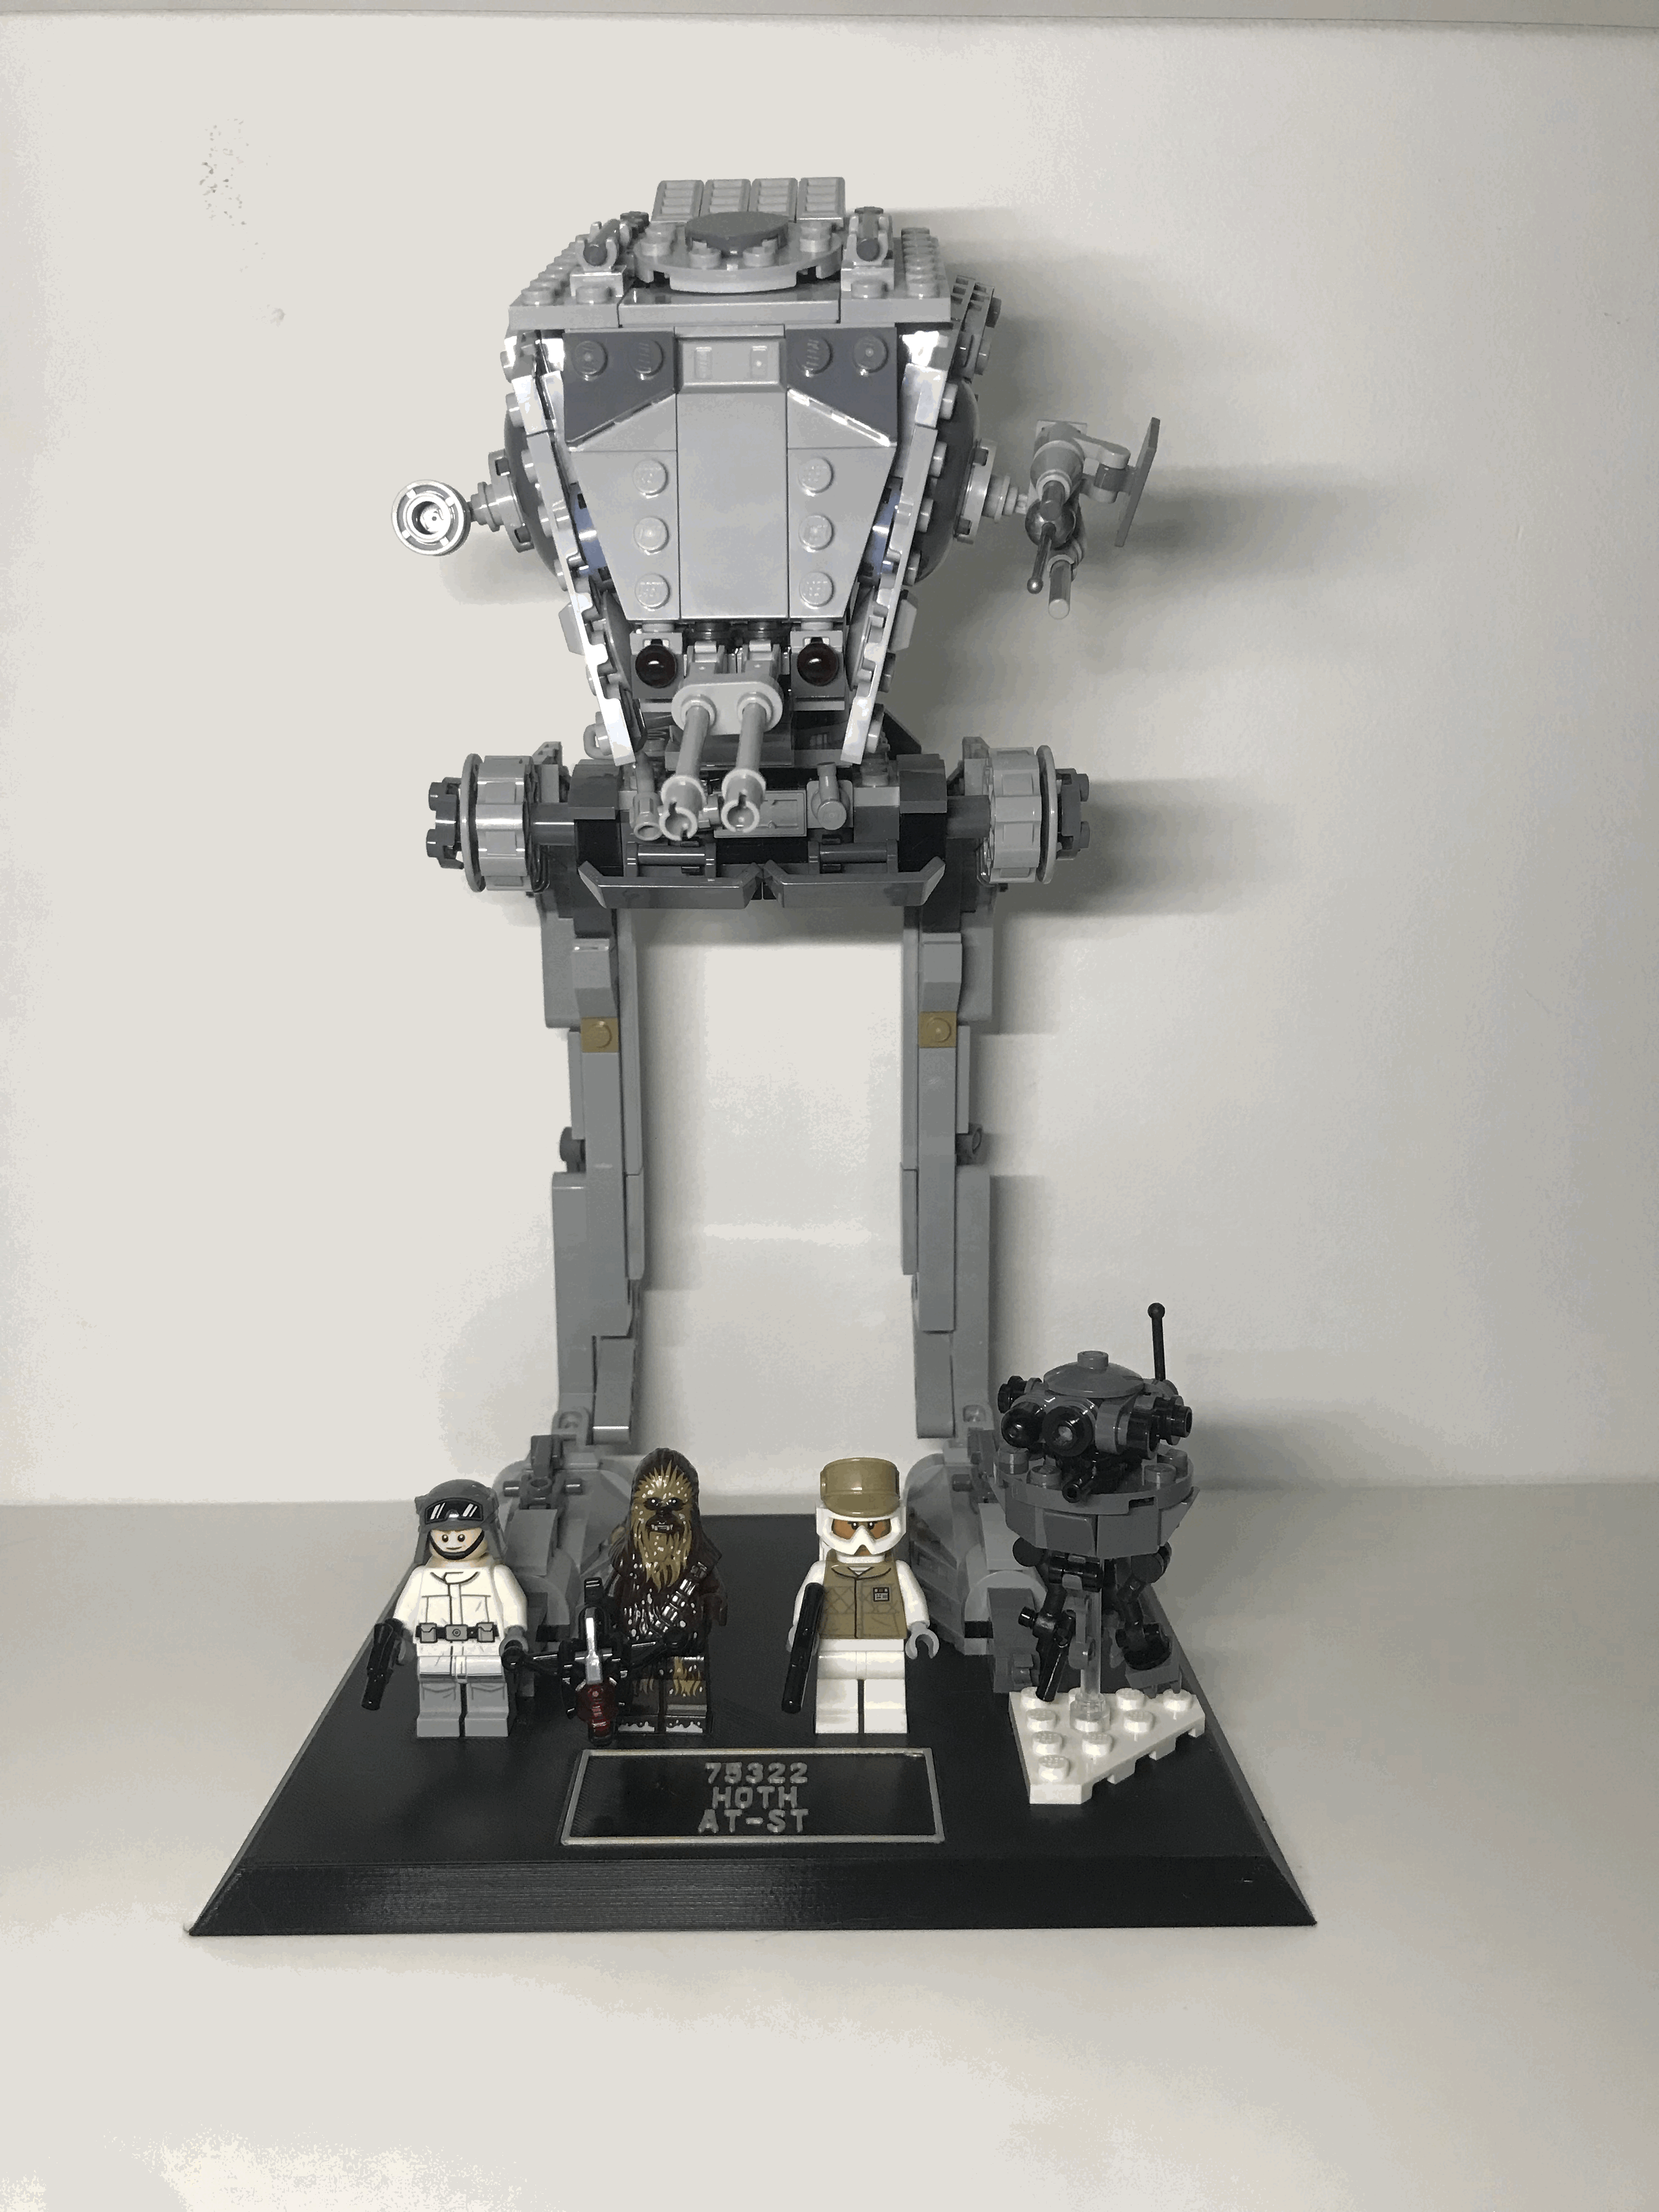 free download lego 79014